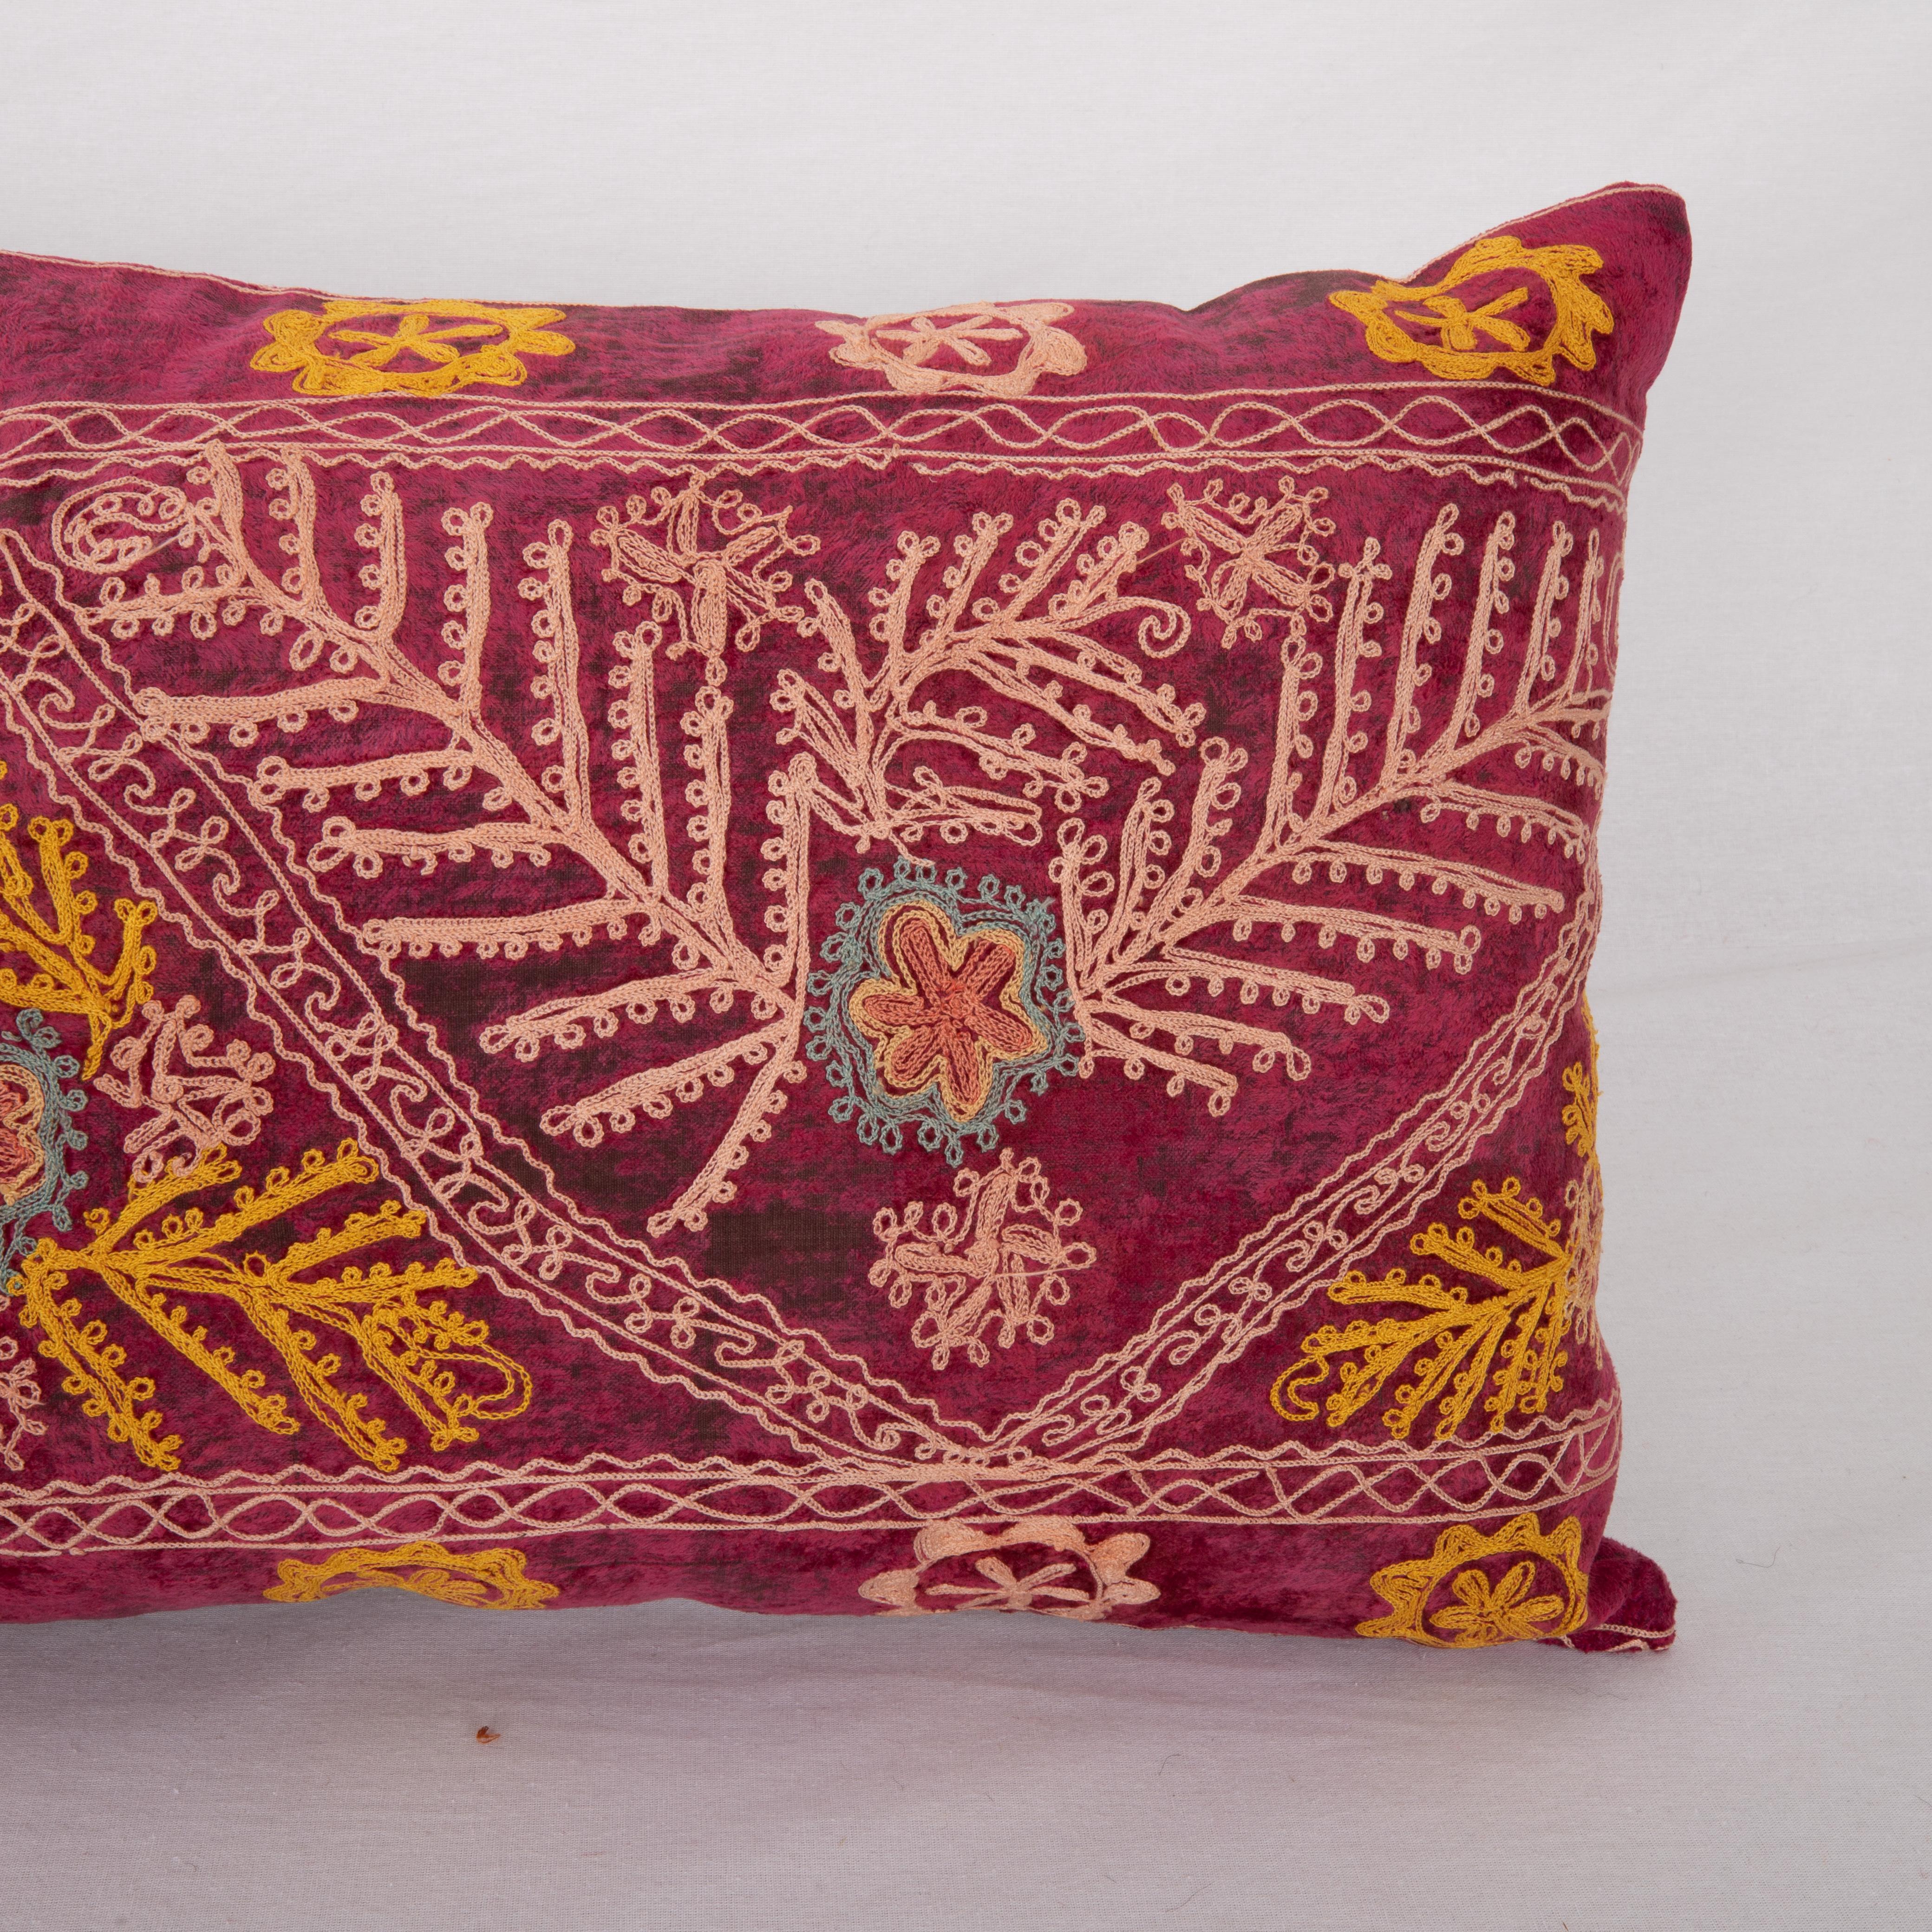 Suzani Pillow Case Made from a Vintage Velvet Ground Suzani, Mid-20th Century In Good Condition For Sale In Istanbul, TR